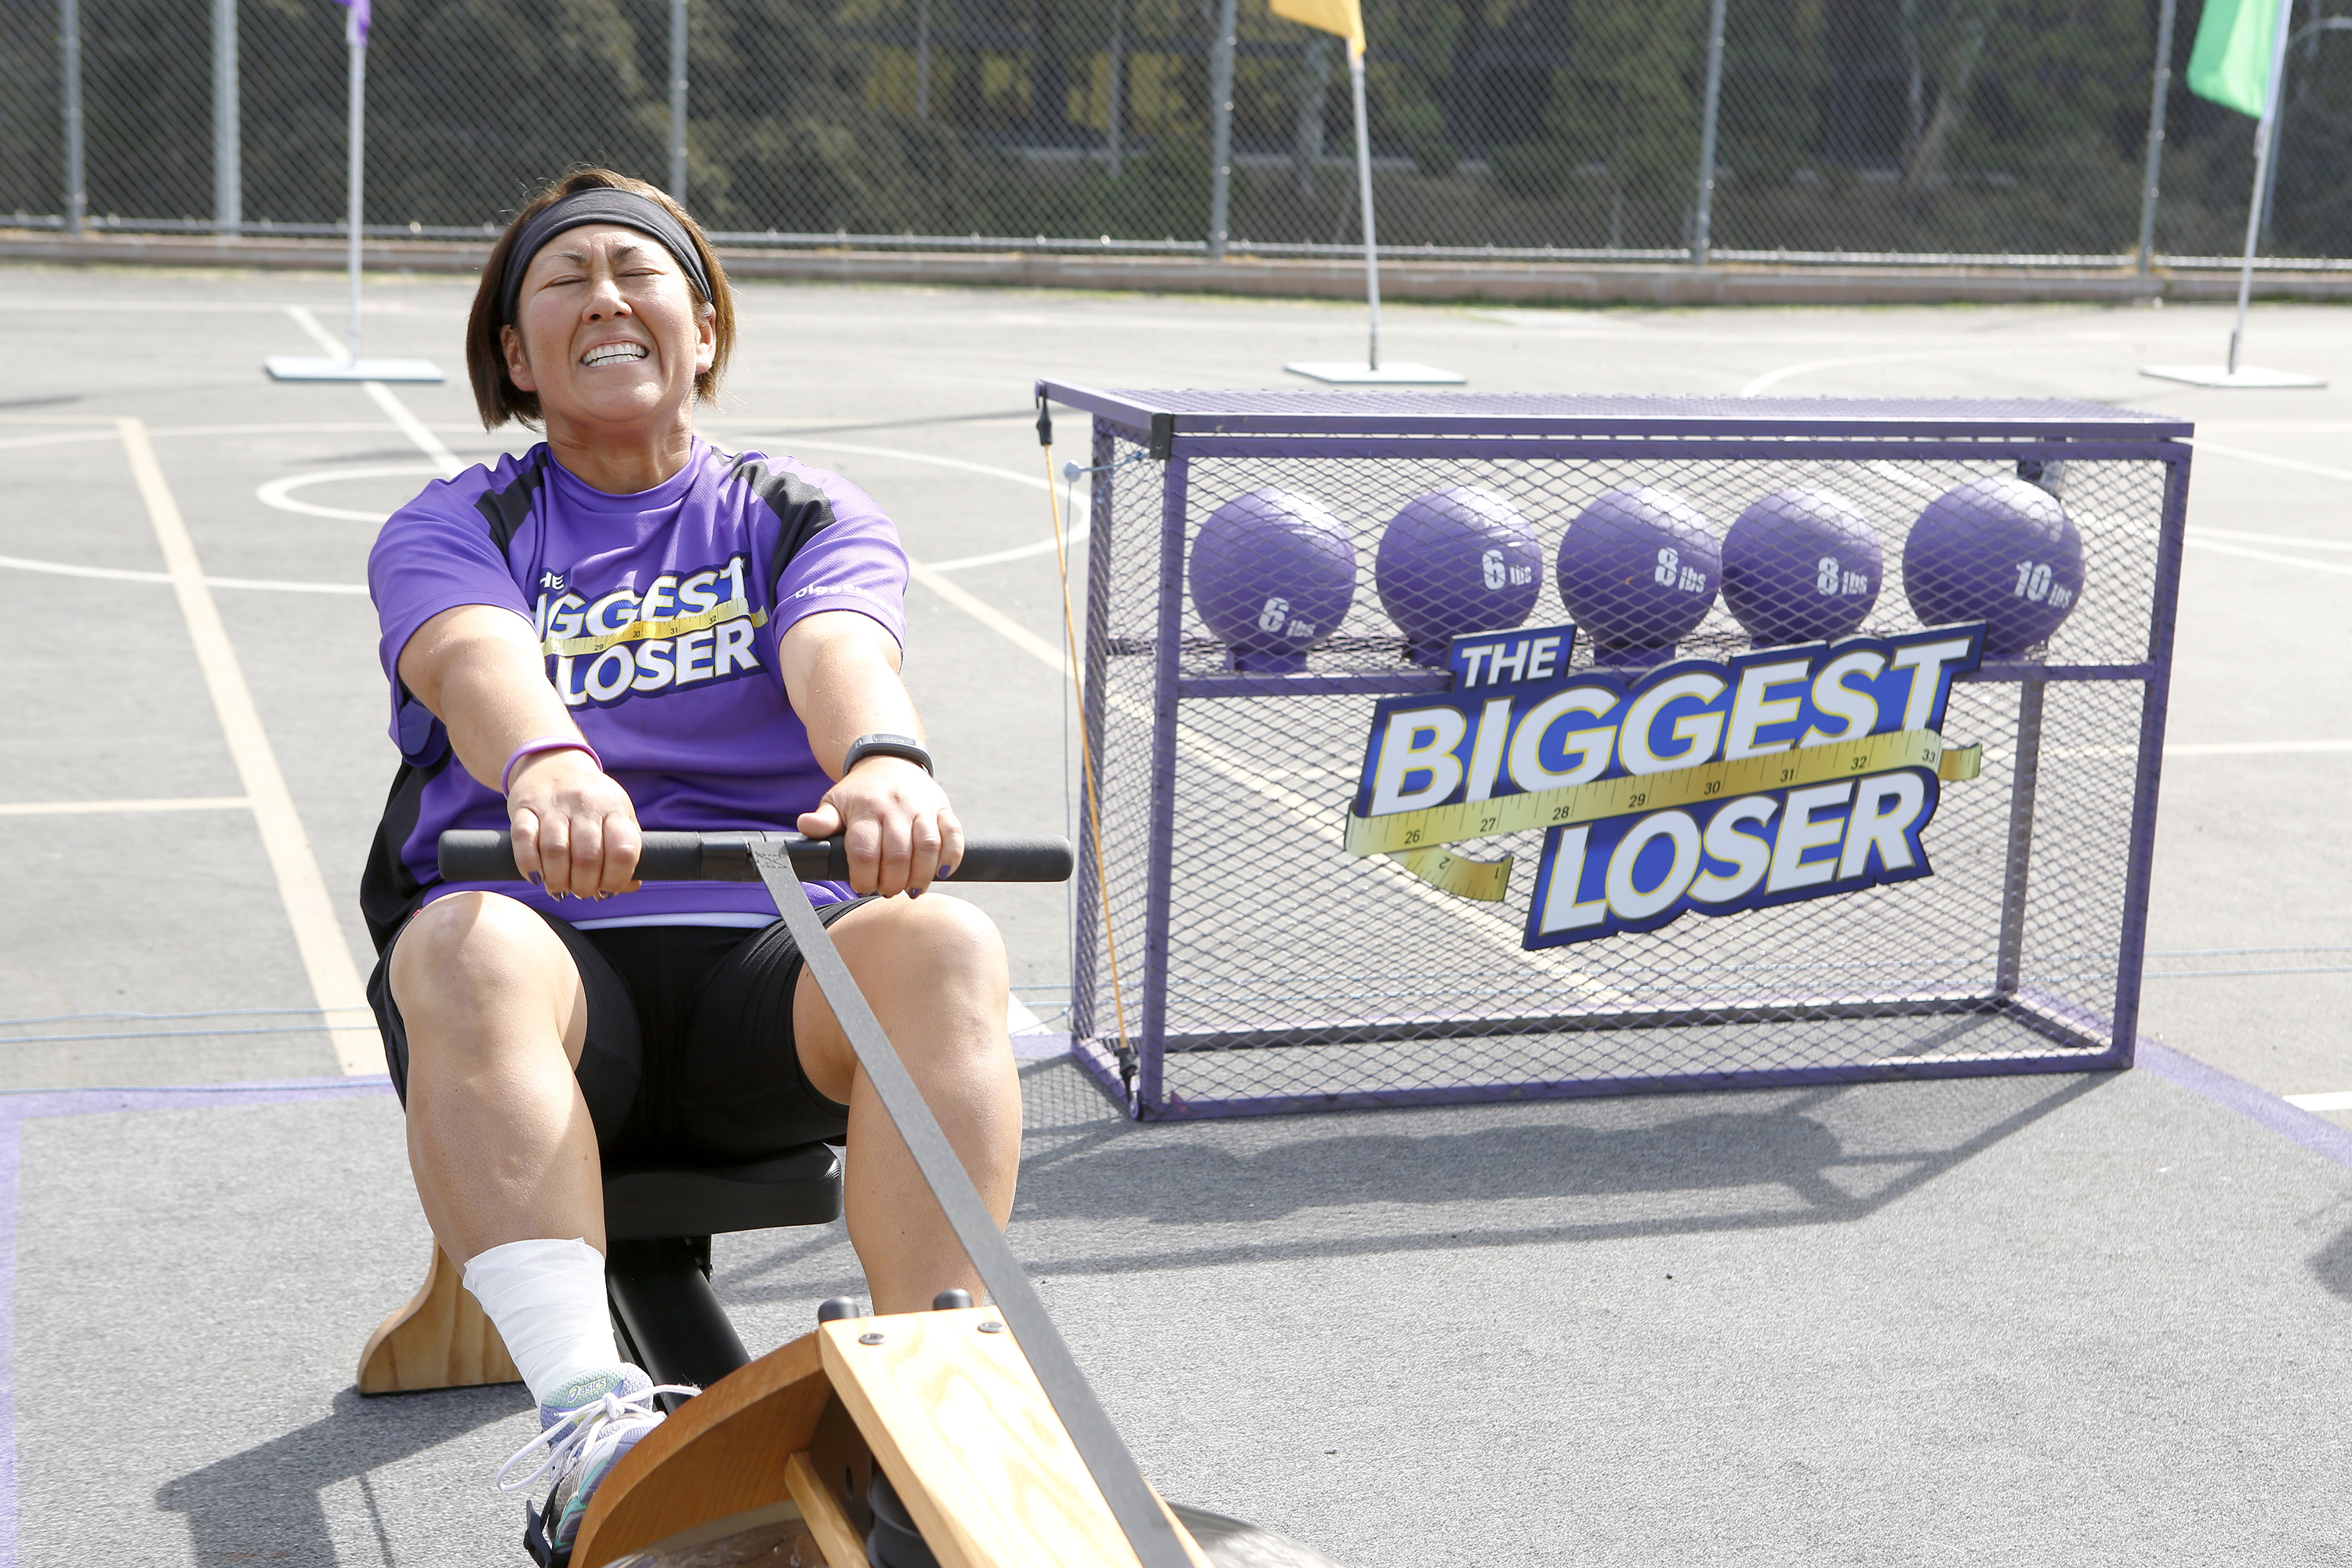 Contestant on The Biggest Loser exercising